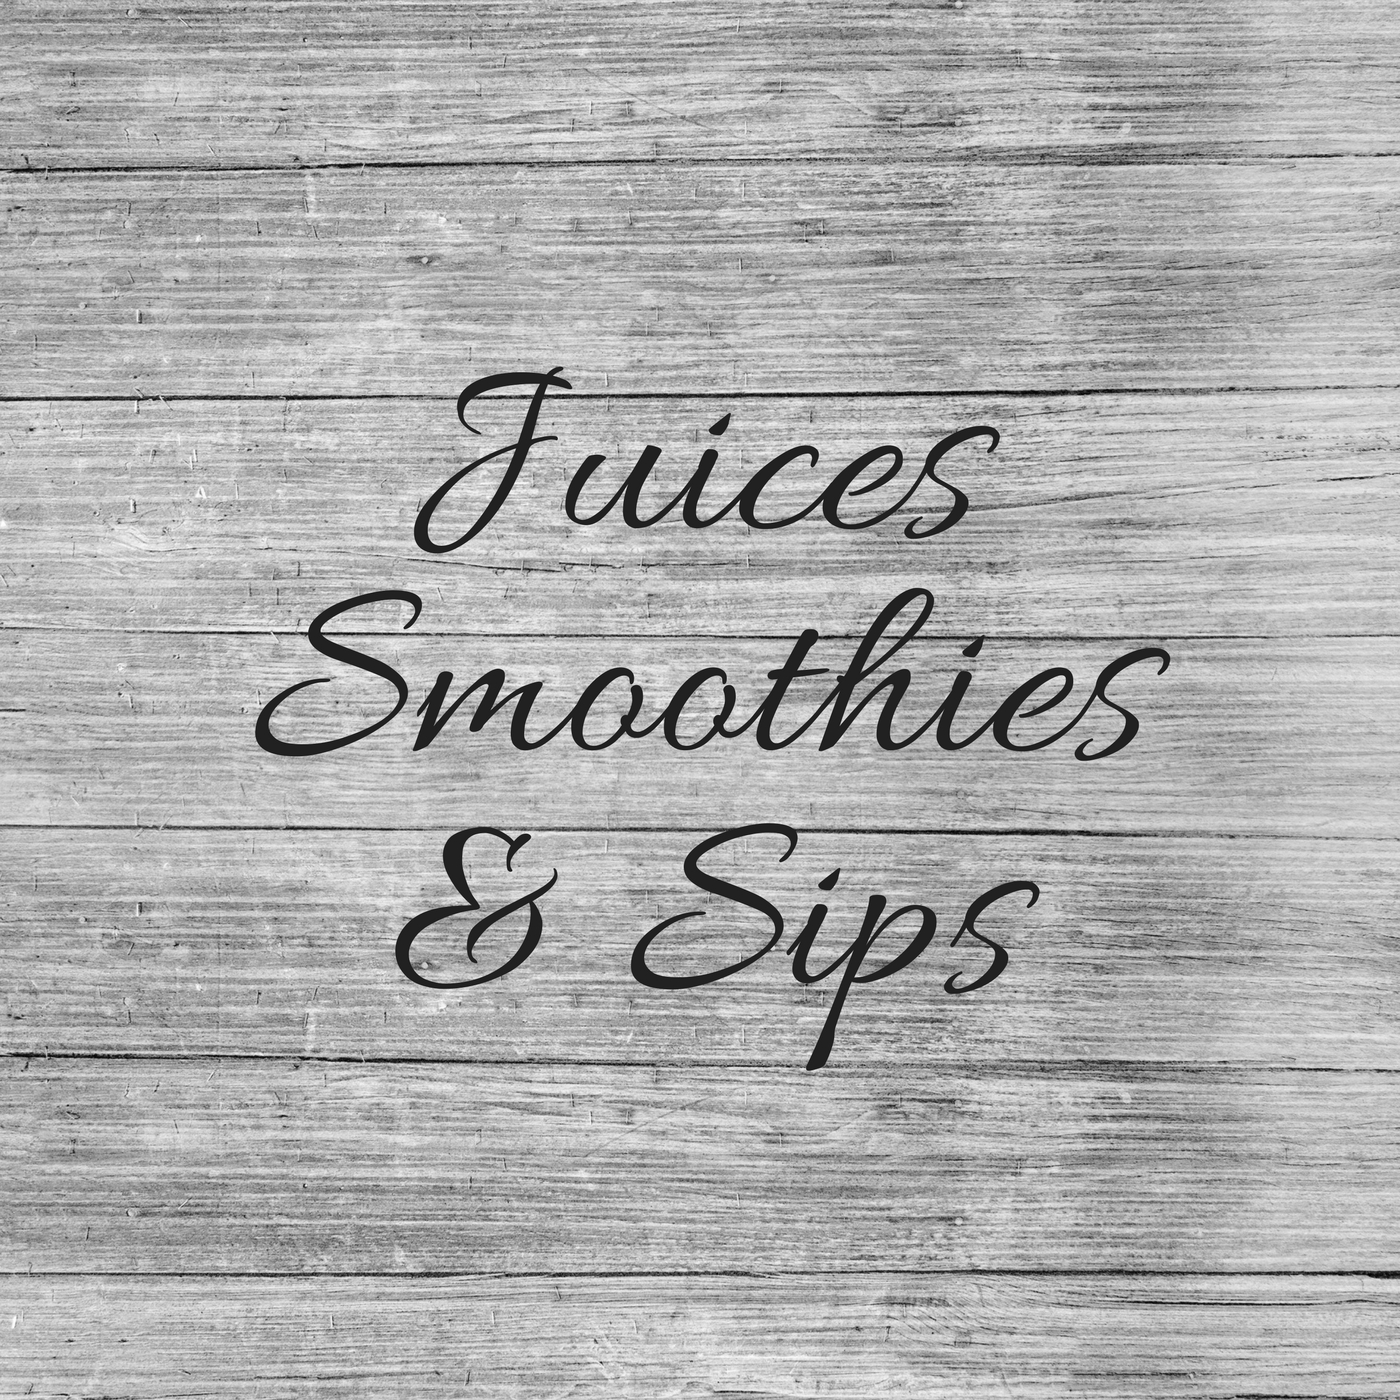 Juices smoothie and sips grey.jpg